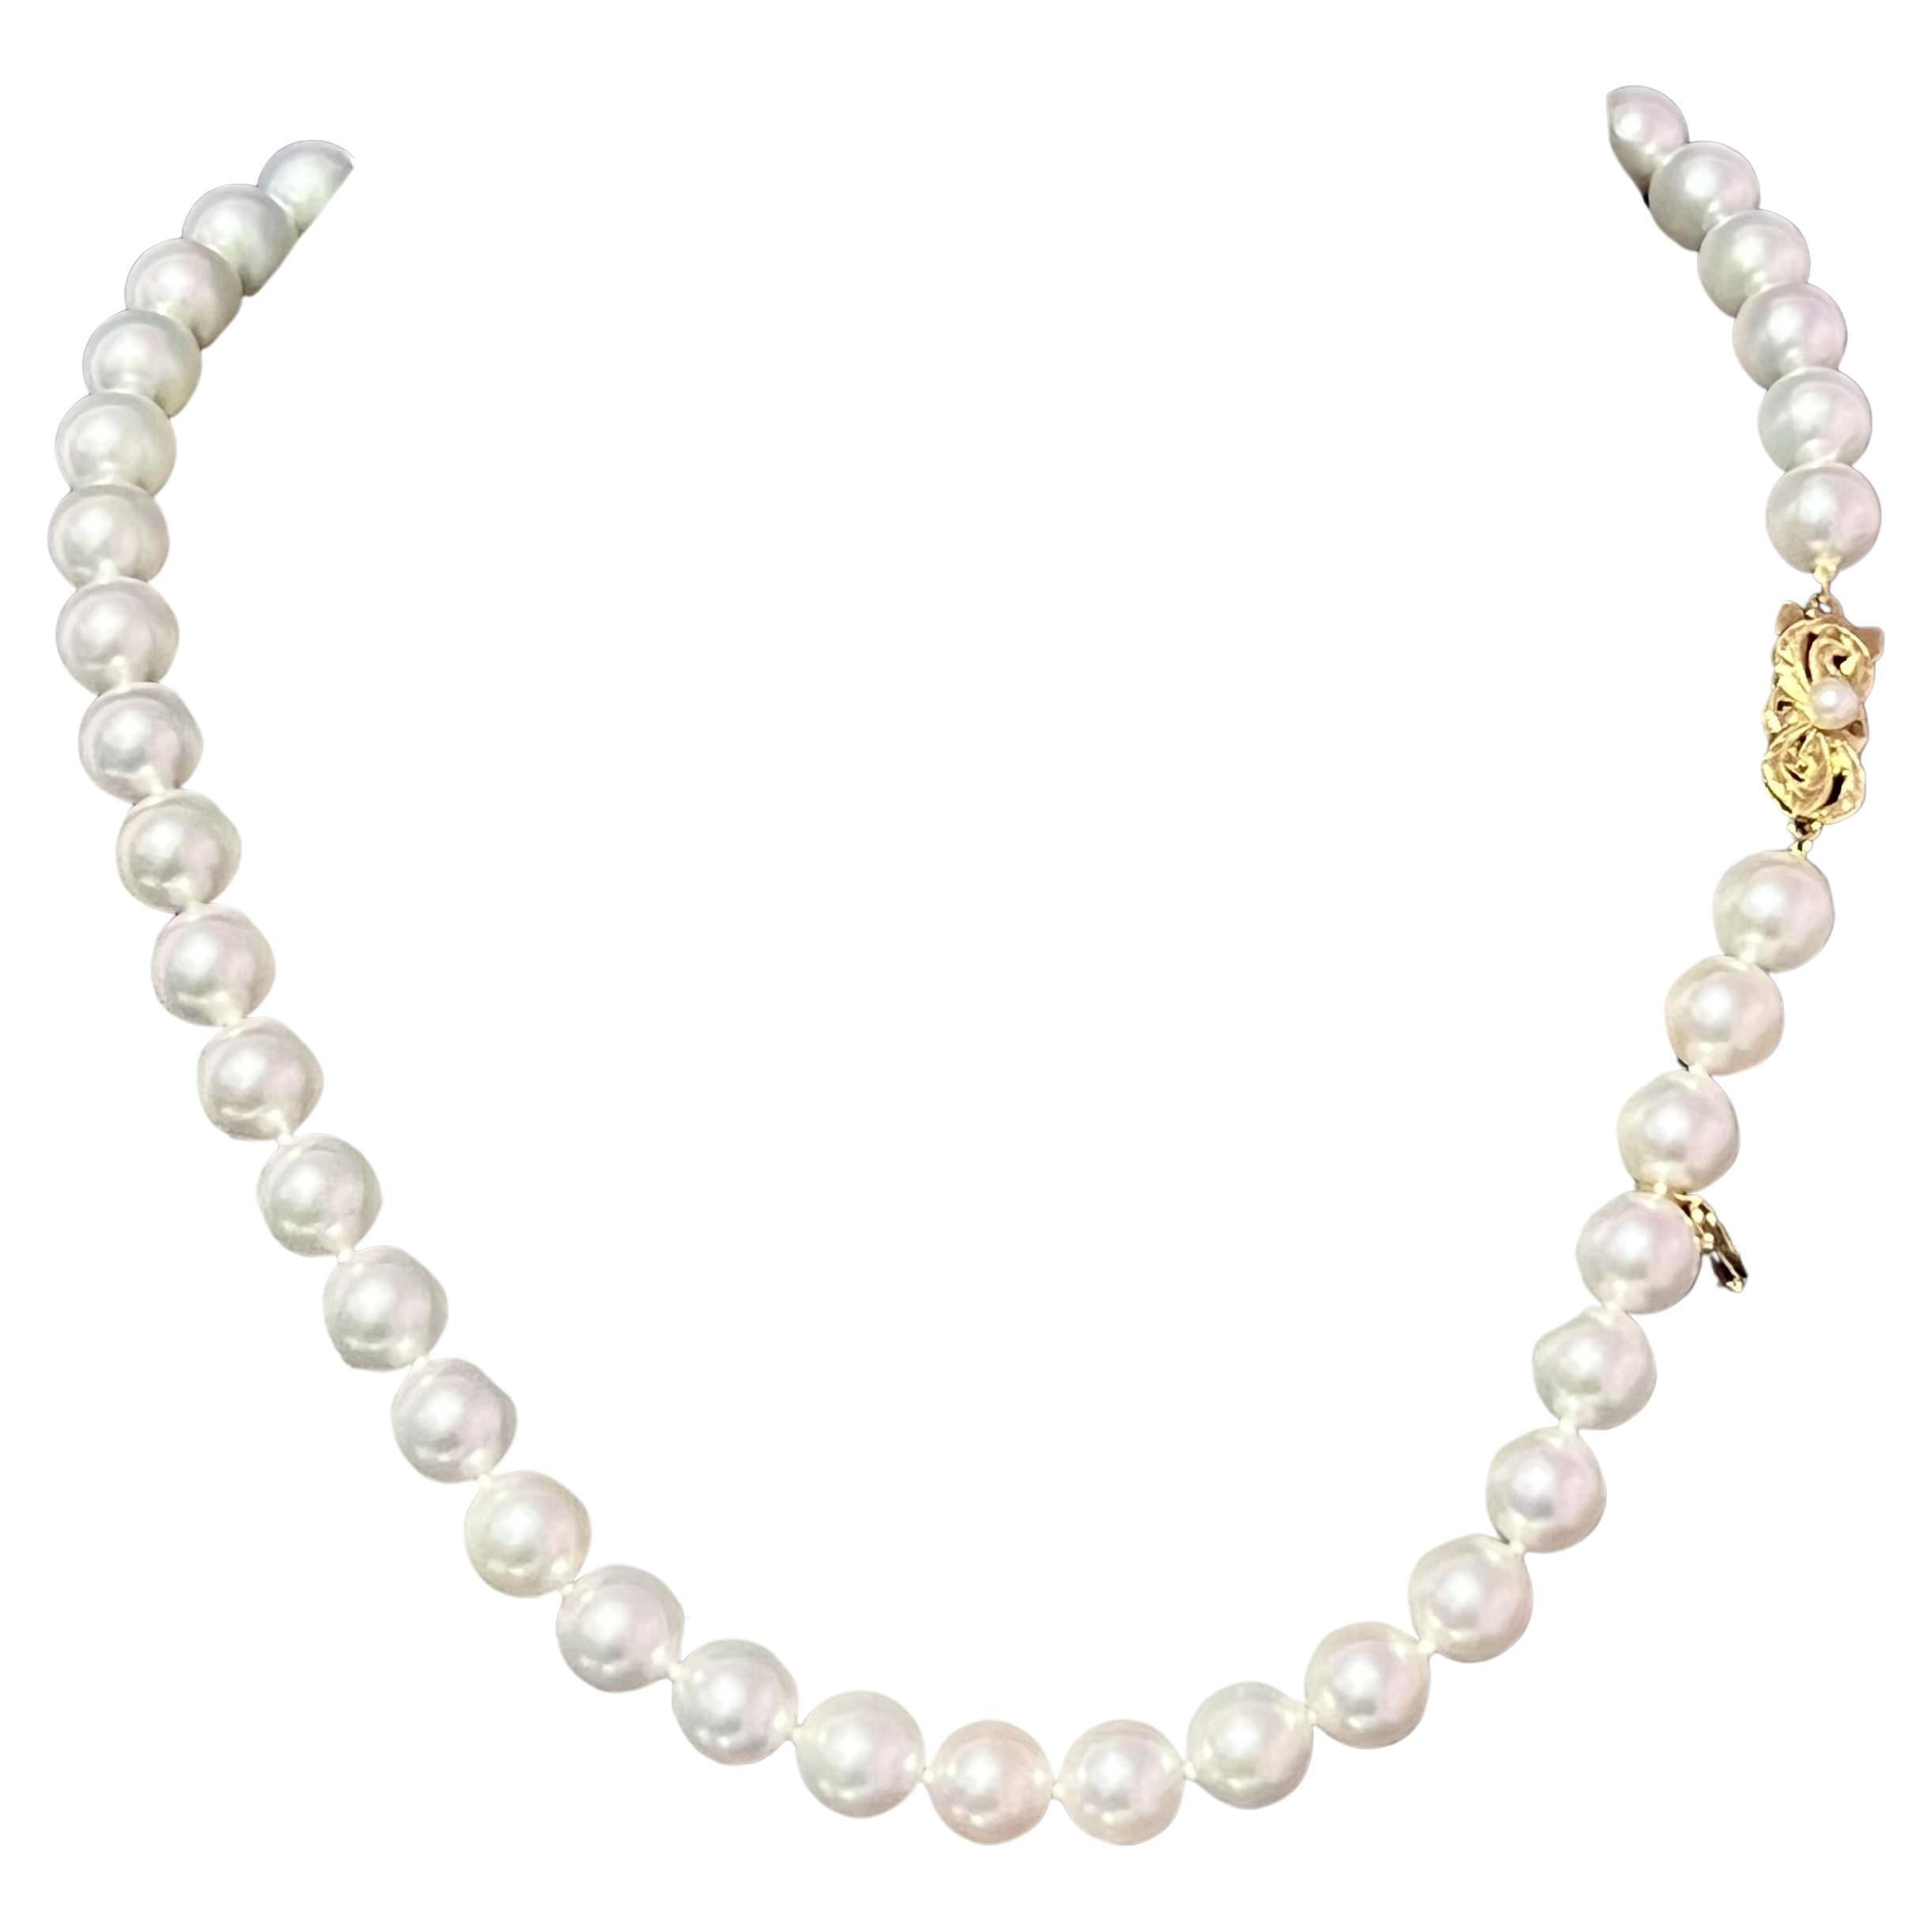 Mikimoto Estate Akoya Pearl Necklace 17" 18k Y Gold 8.5 mm Certified